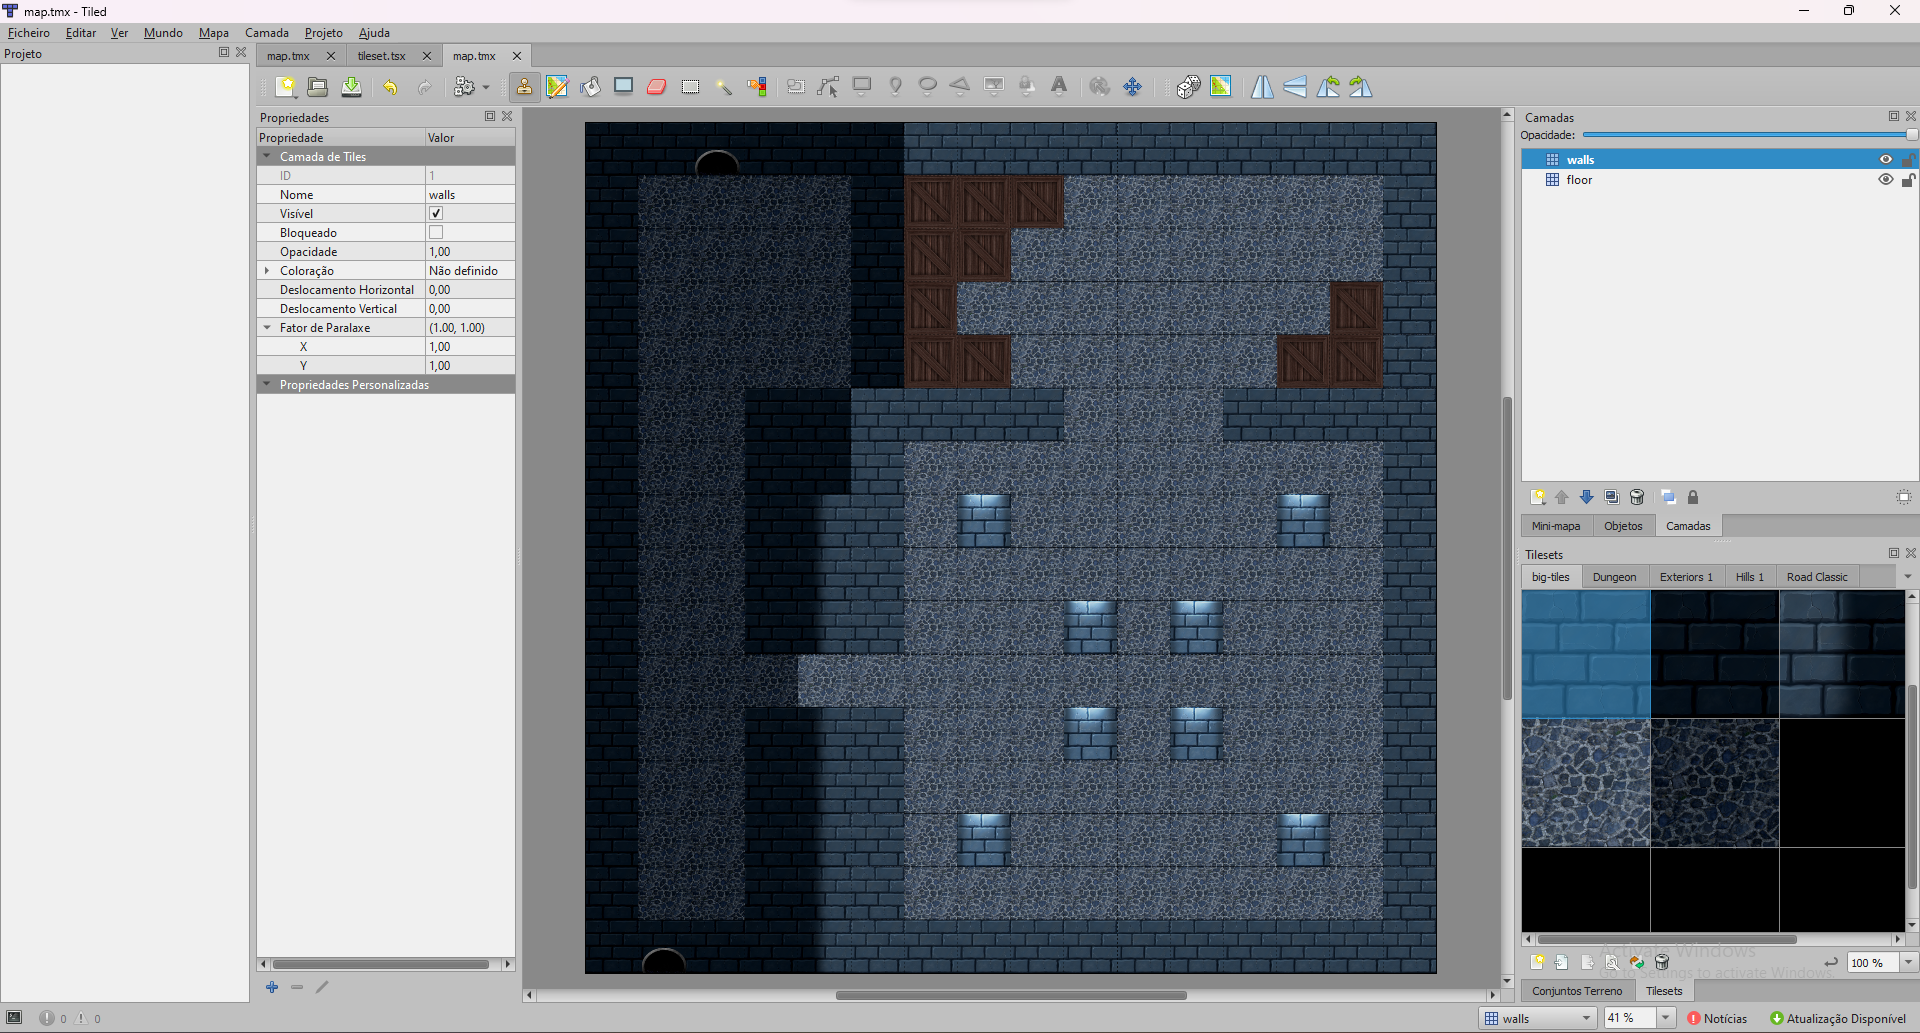 Image of the 2D map being edited on Tiled